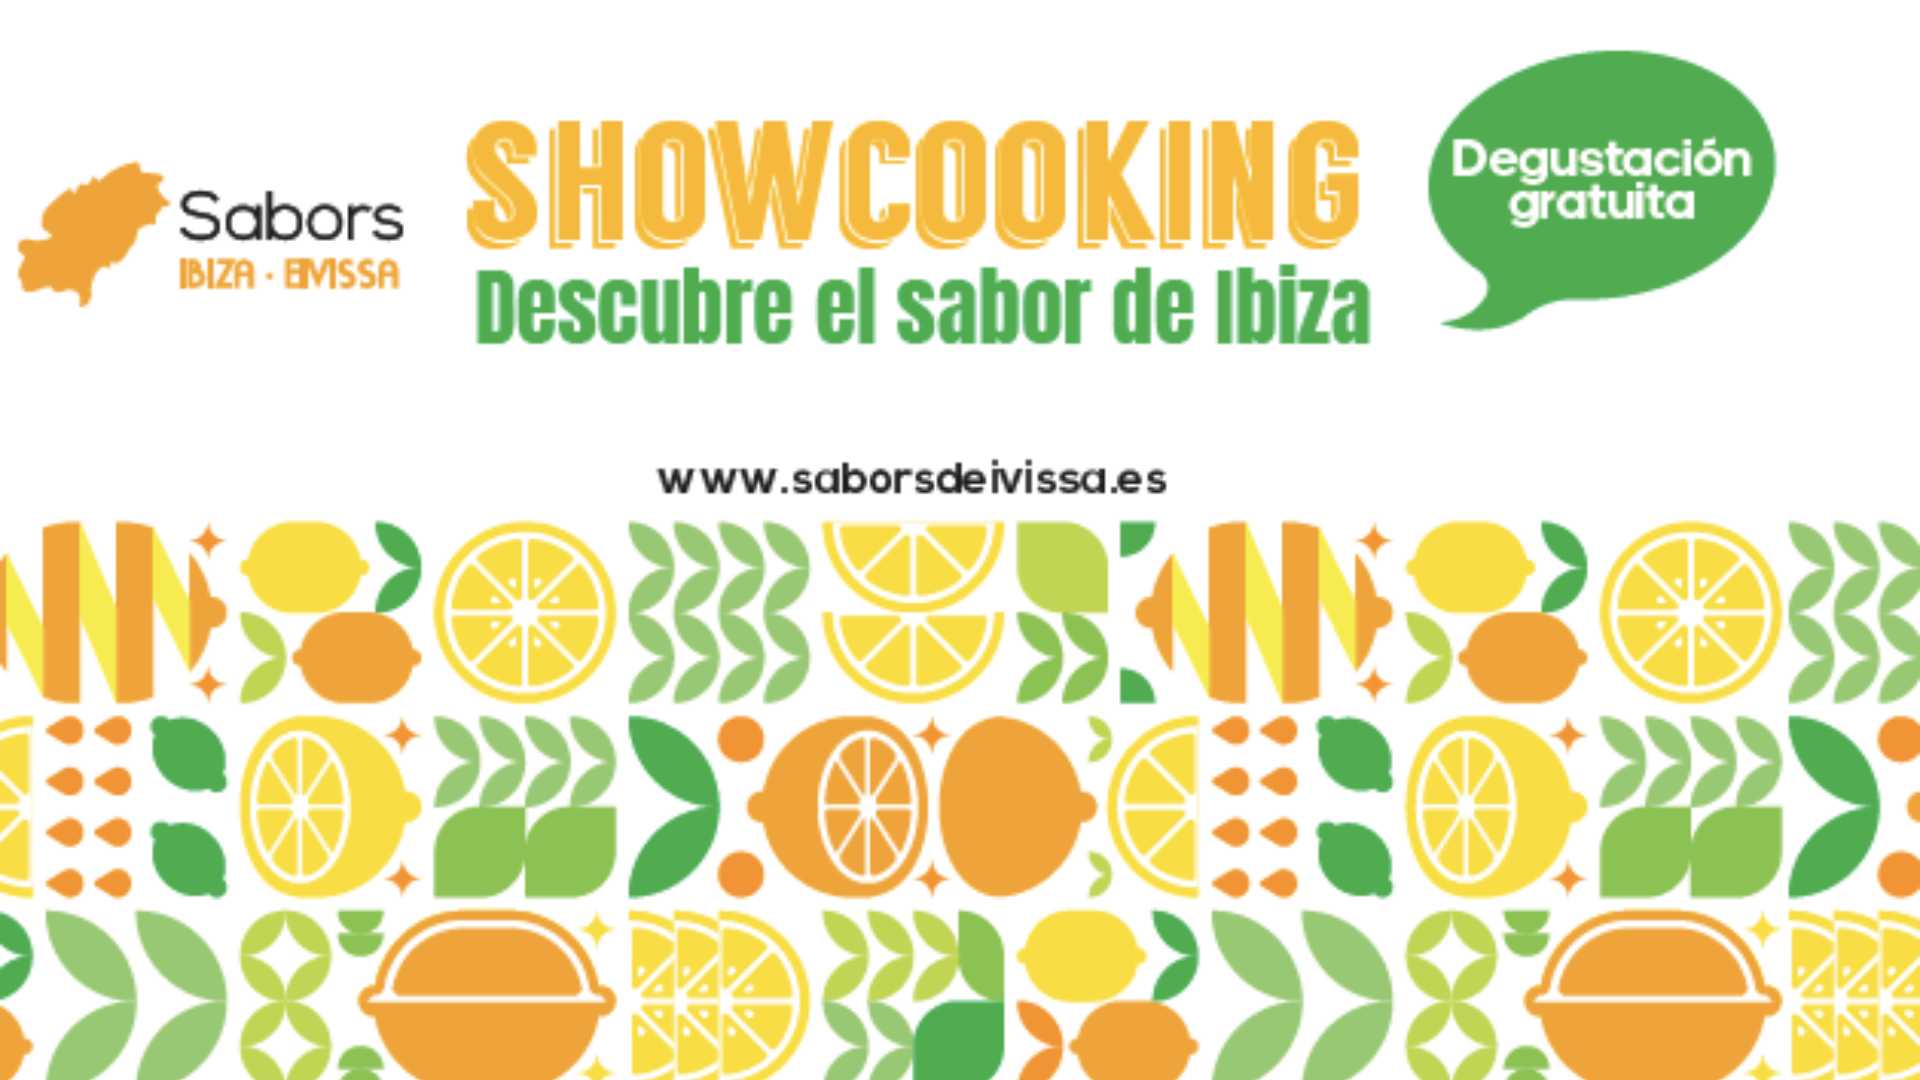 Showcooking